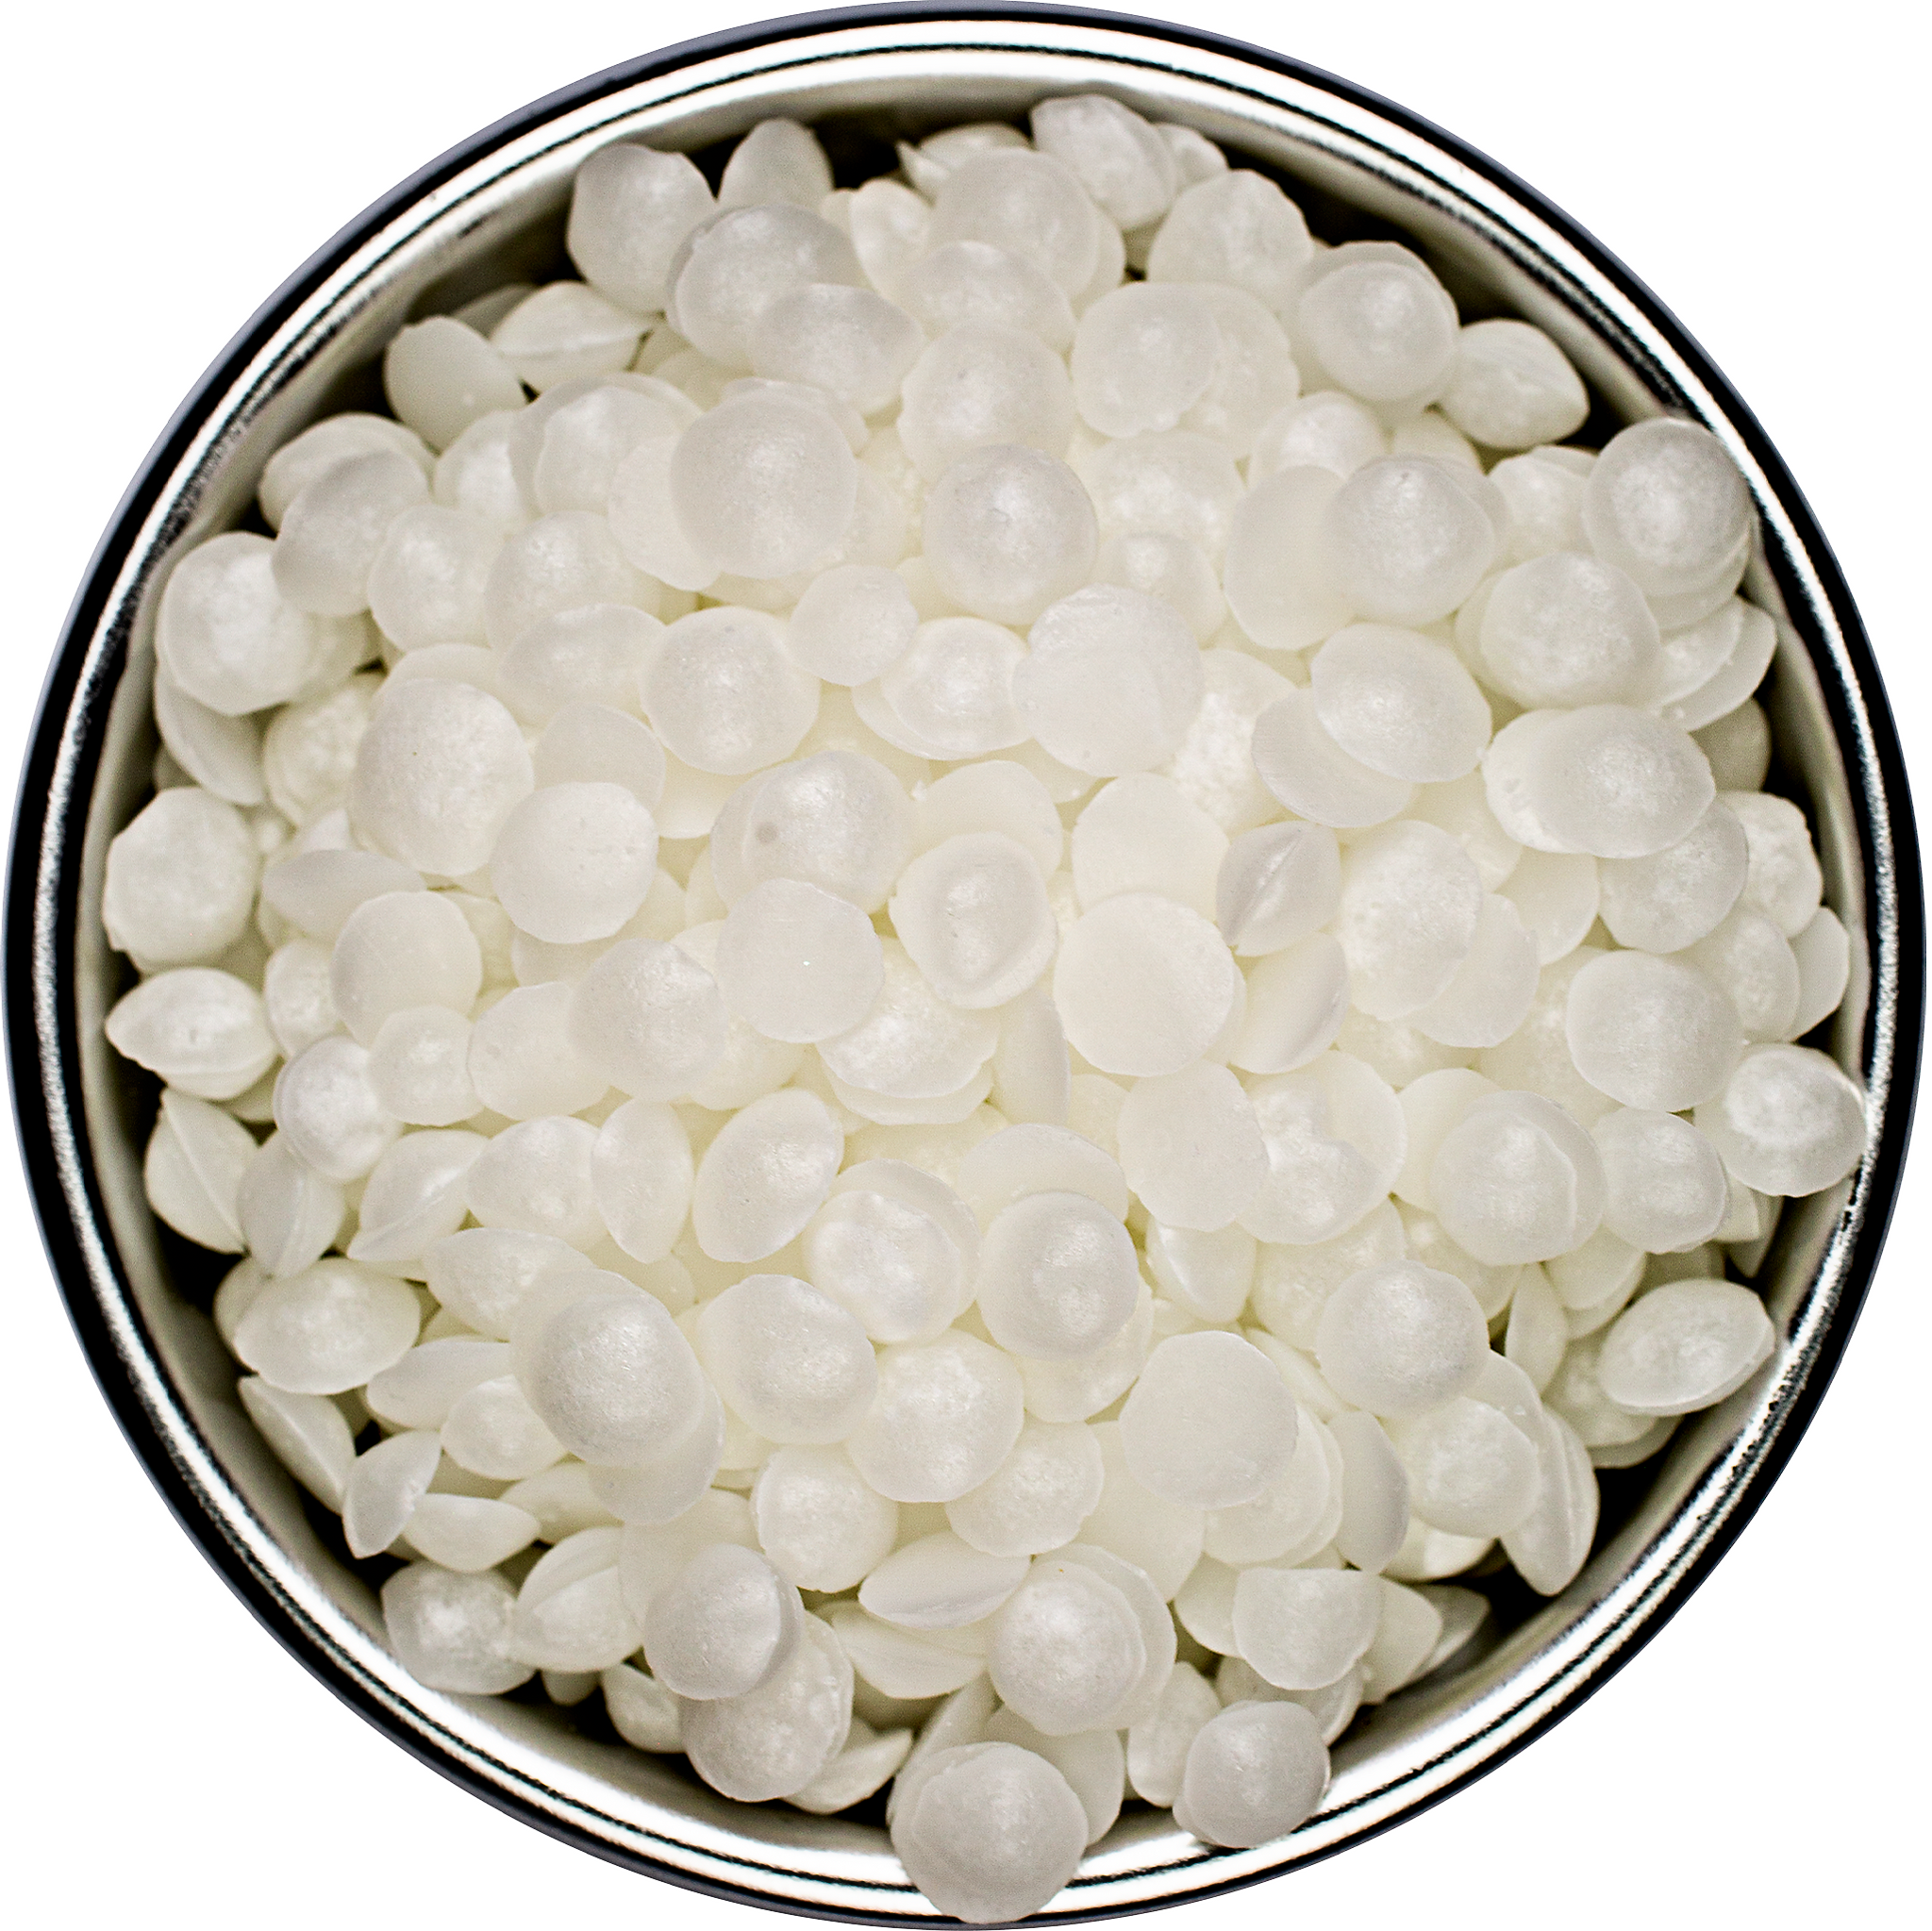 Emulsifying Wax NF – Little Herbal Apothecary